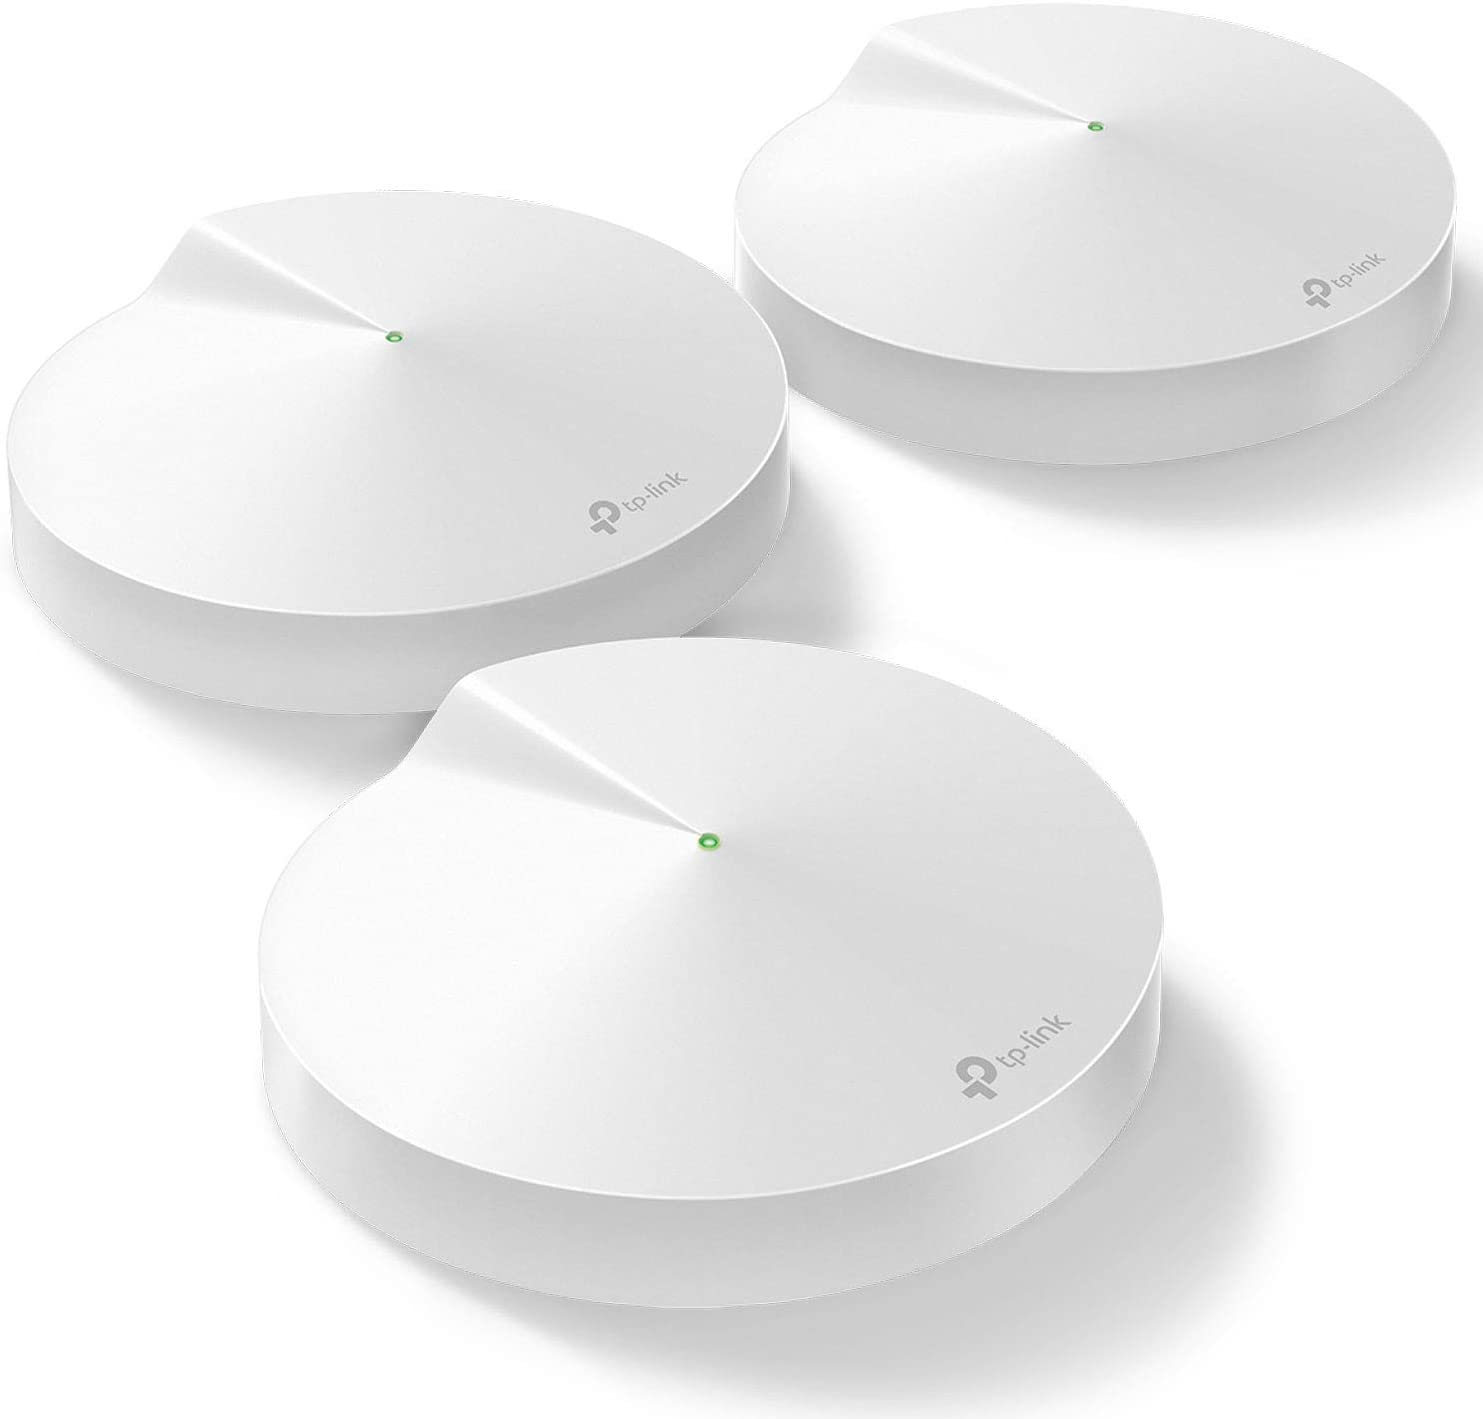 TP-Link - Deco M5 Mesh WiFi System, Up to 5,500 sq. ft. Whole Home Coverage and 100+ Devices, WiFi Router/Extender Replacement